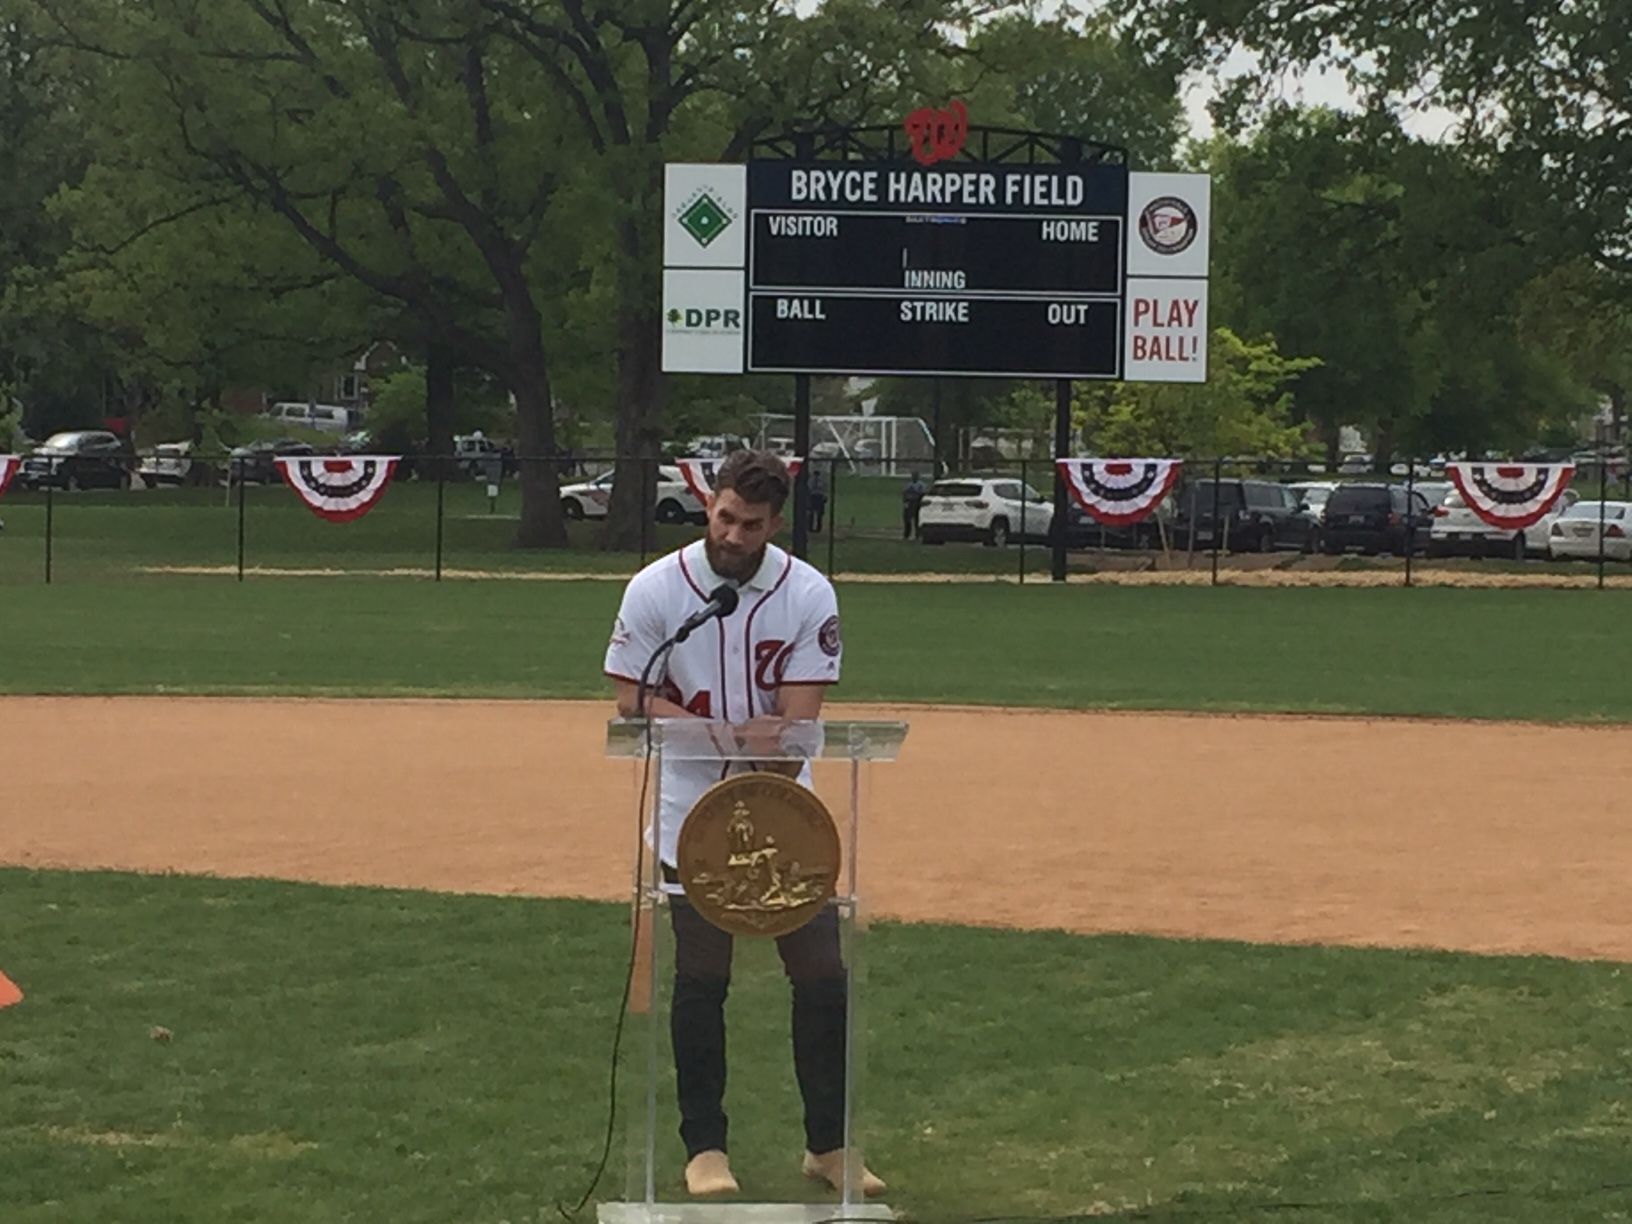 “It means a lot. This is my second home. This is somewhere that I love to be," Harper said. (WTOP/John Domen)